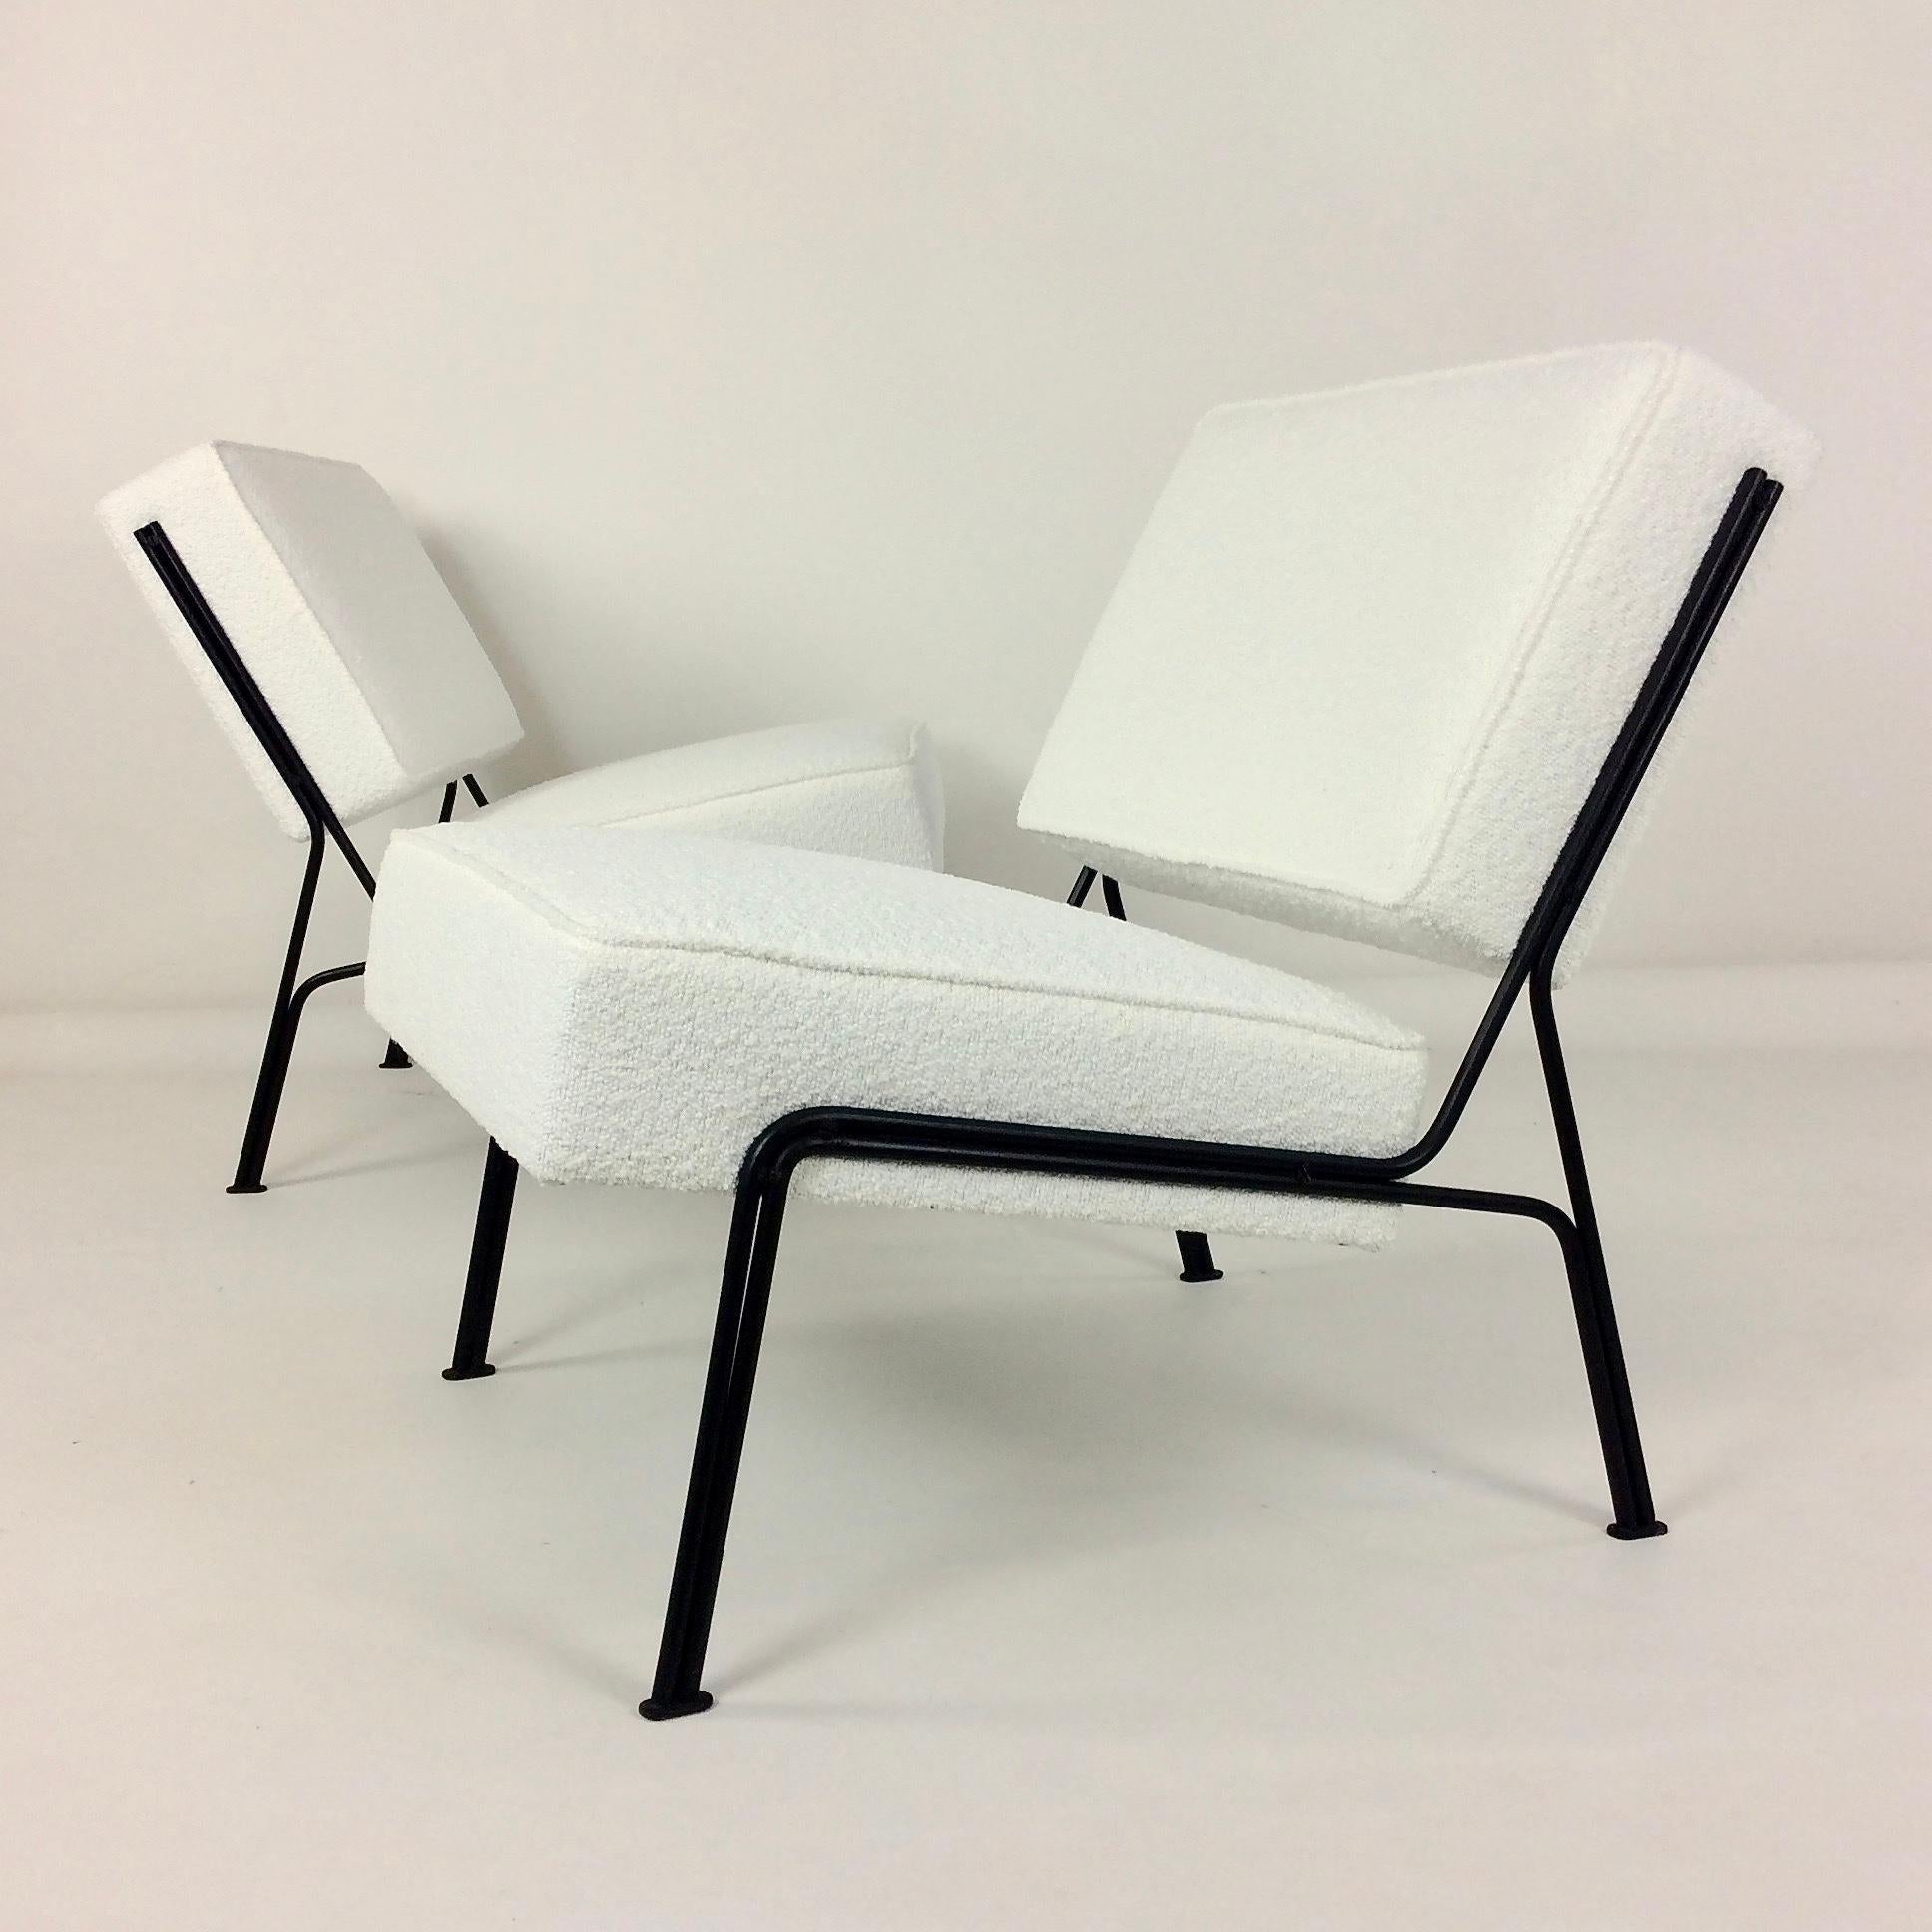 Mid-Century Modern Pair of G2 Chairs By A.R.P. Guariche, Motte, Mortier for Airborne, 1953, France. For Sale